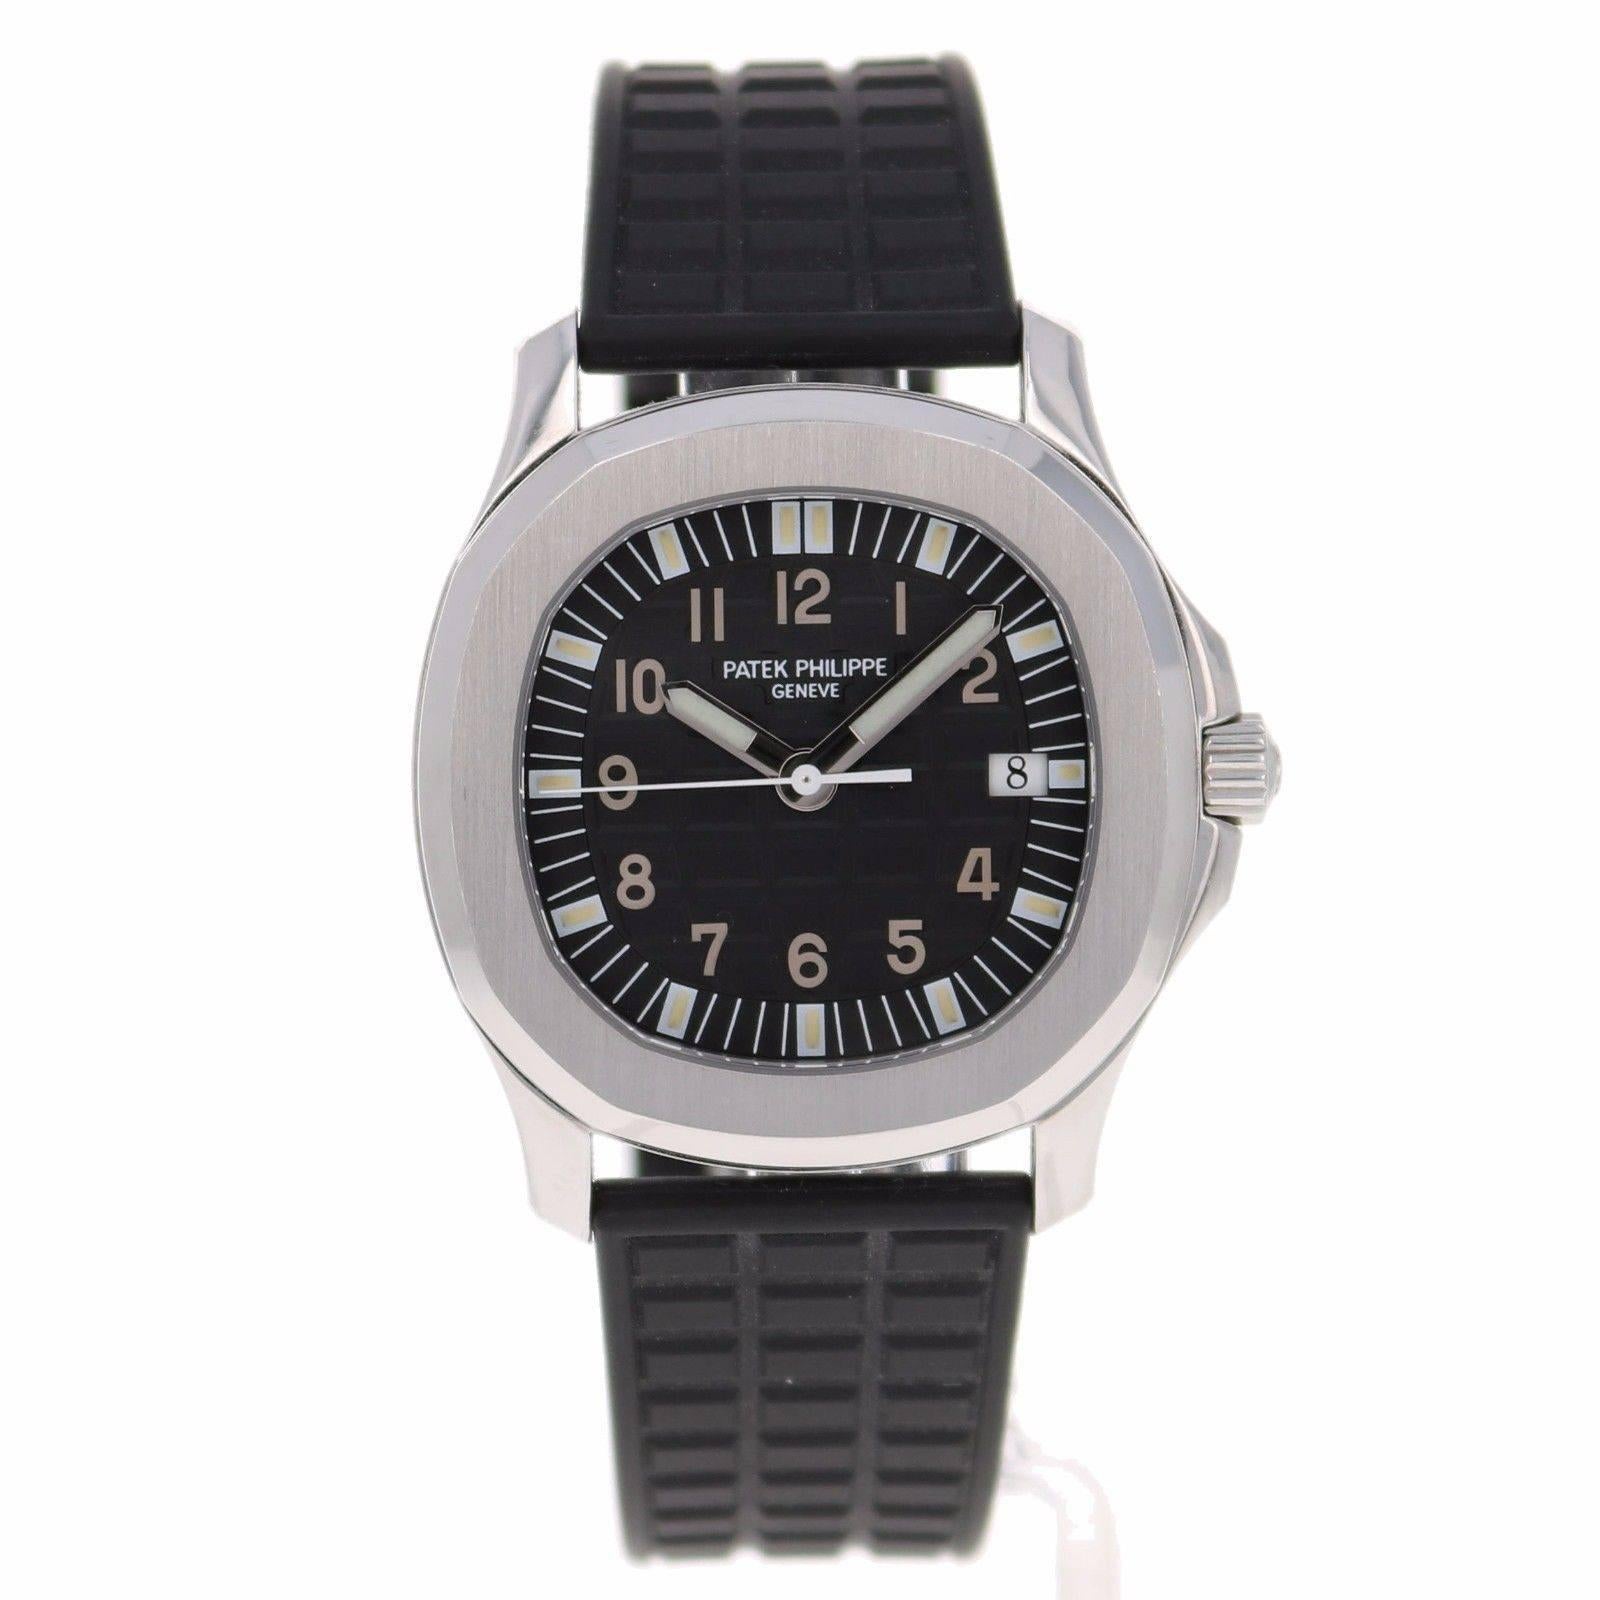 
Brand Name	Patek Philippe
Style Number	5064A-001
Also Called	5064
Series	Aquanaut
Case Material	Stainless Steel
Dial Color	Black
Movement	Quartz
Functions	Hours, Minutes, Seconds, Date
Crystal Material	Sapphire
Case